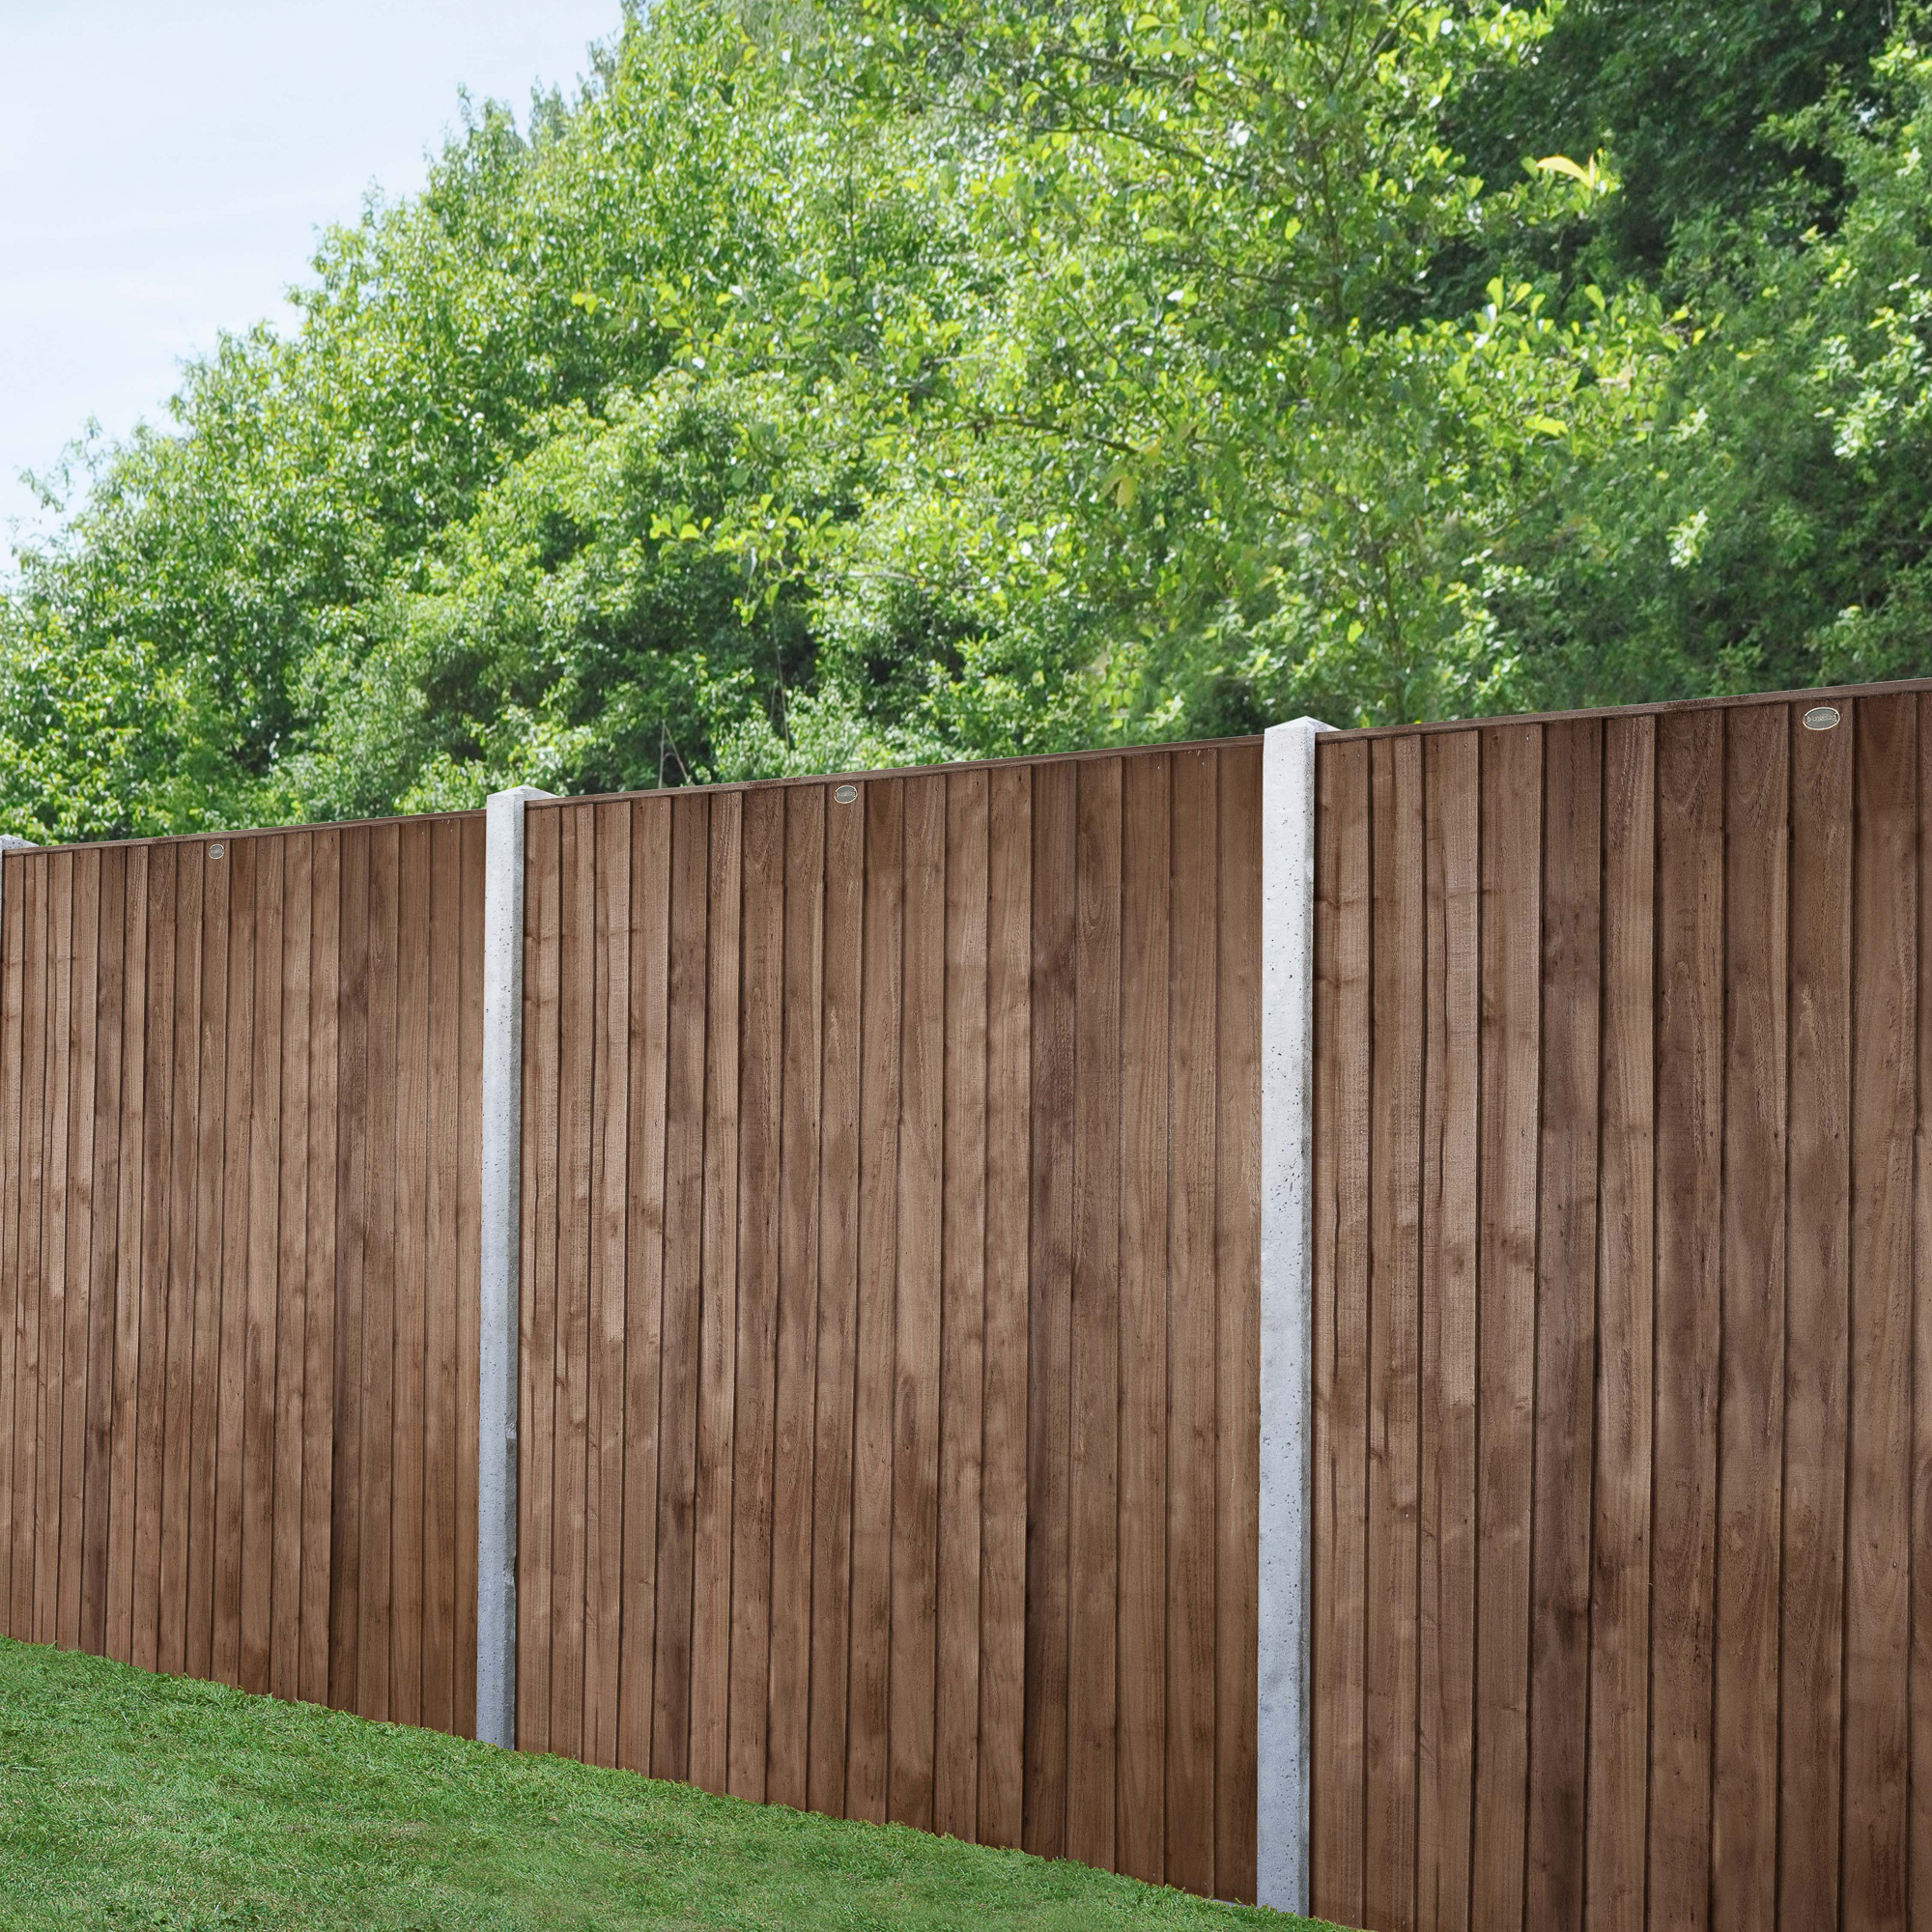 Image of Forest Garden Brown Pressure Treated Closeboard Fence Panel - 1830 x 1680mm - 6 x 5'6ft - Pack of 3